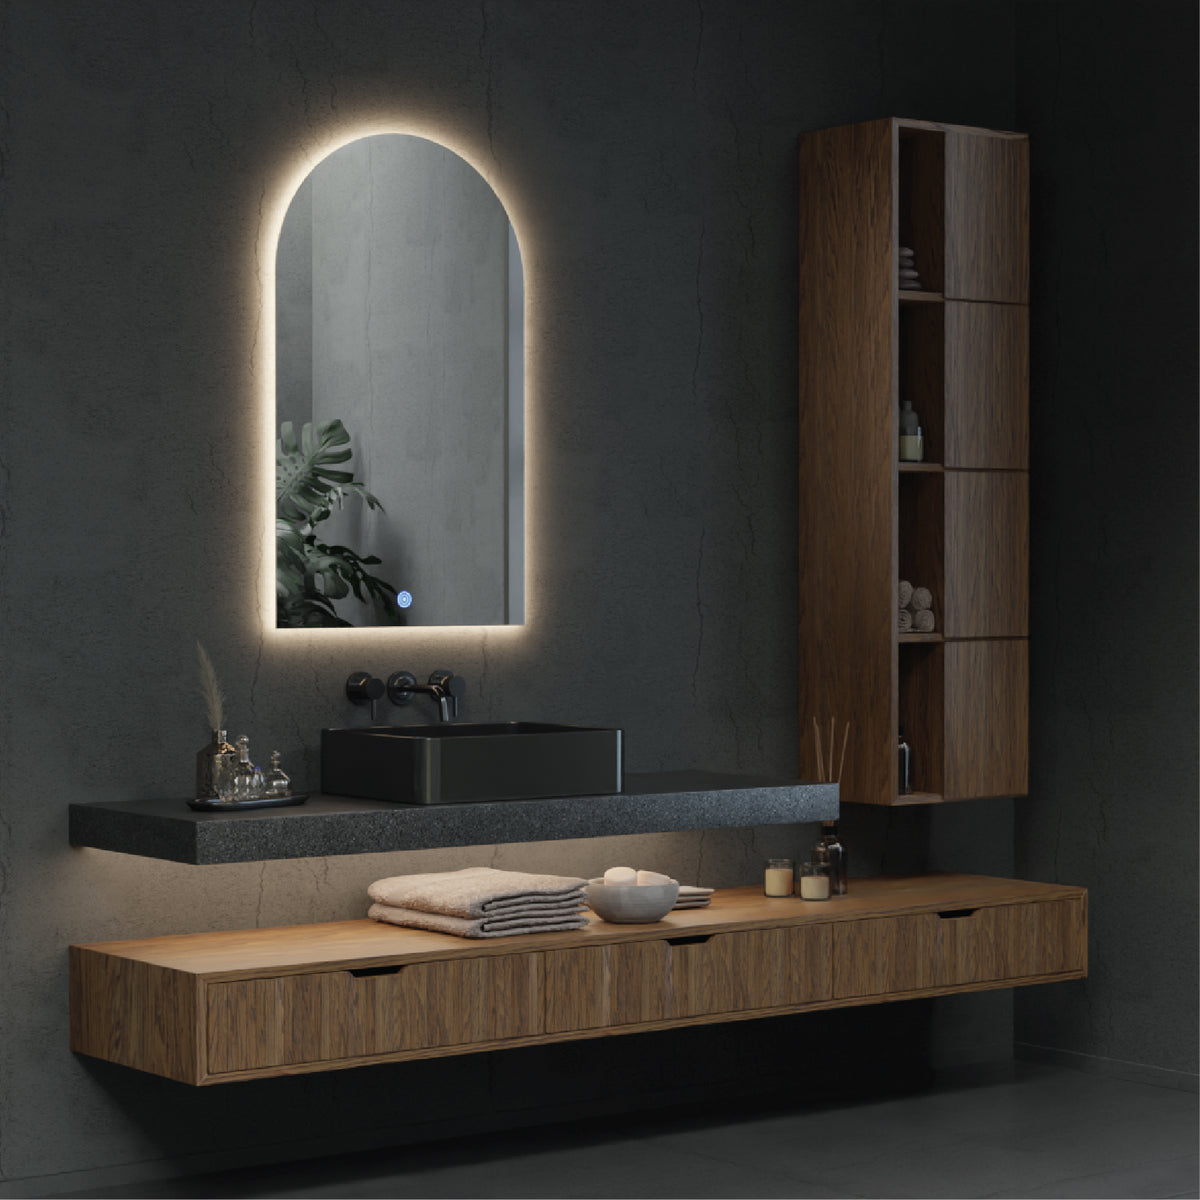 Wooden Cabinets with a one sided rounded rectangle LED Mirror